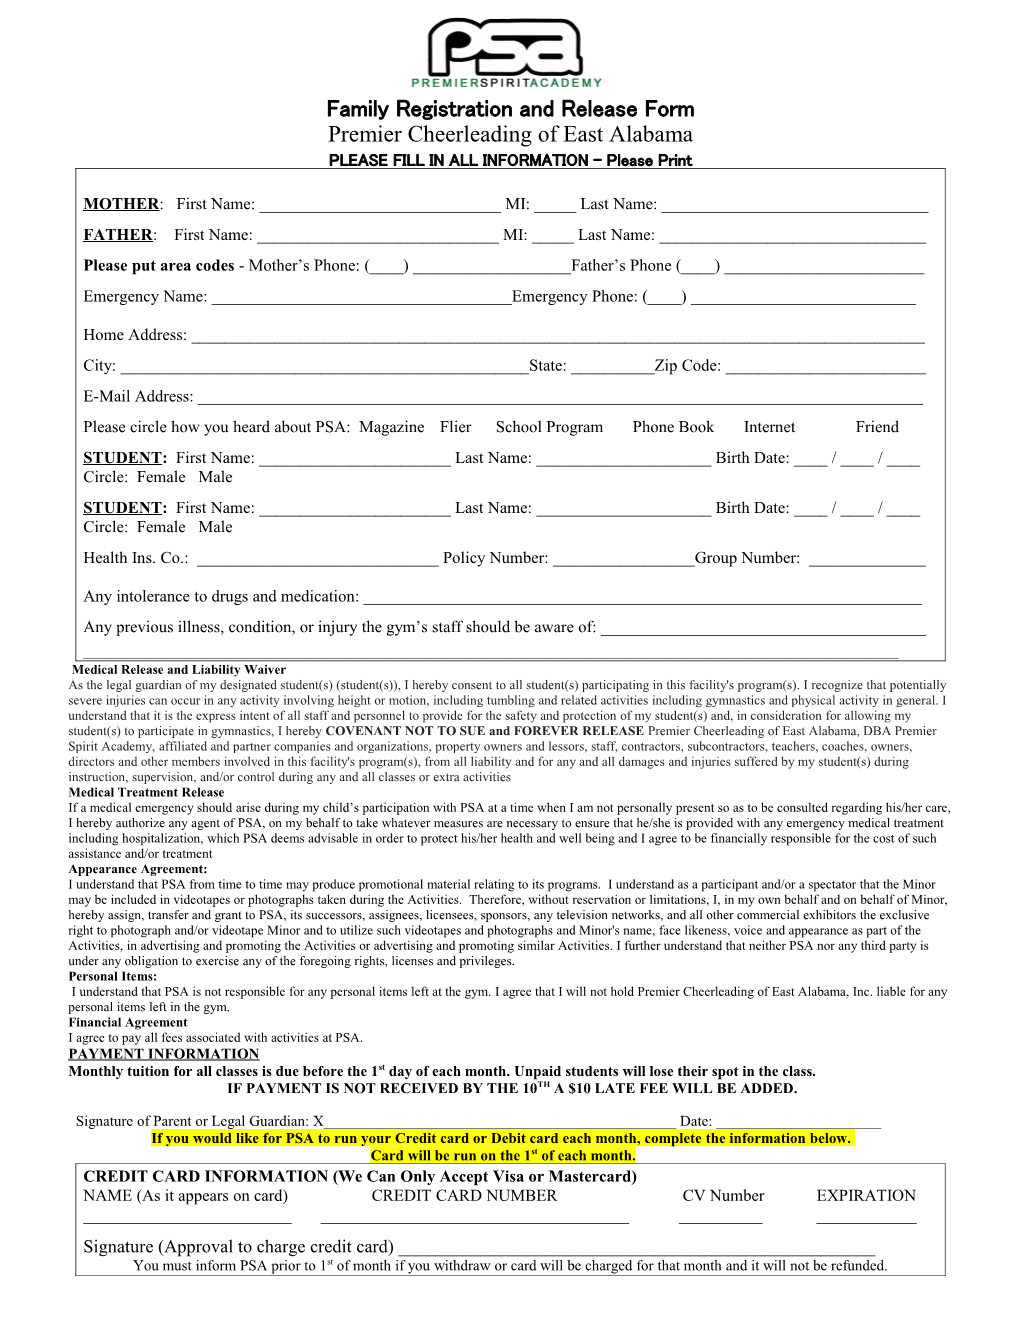 Family Registration and Release Form